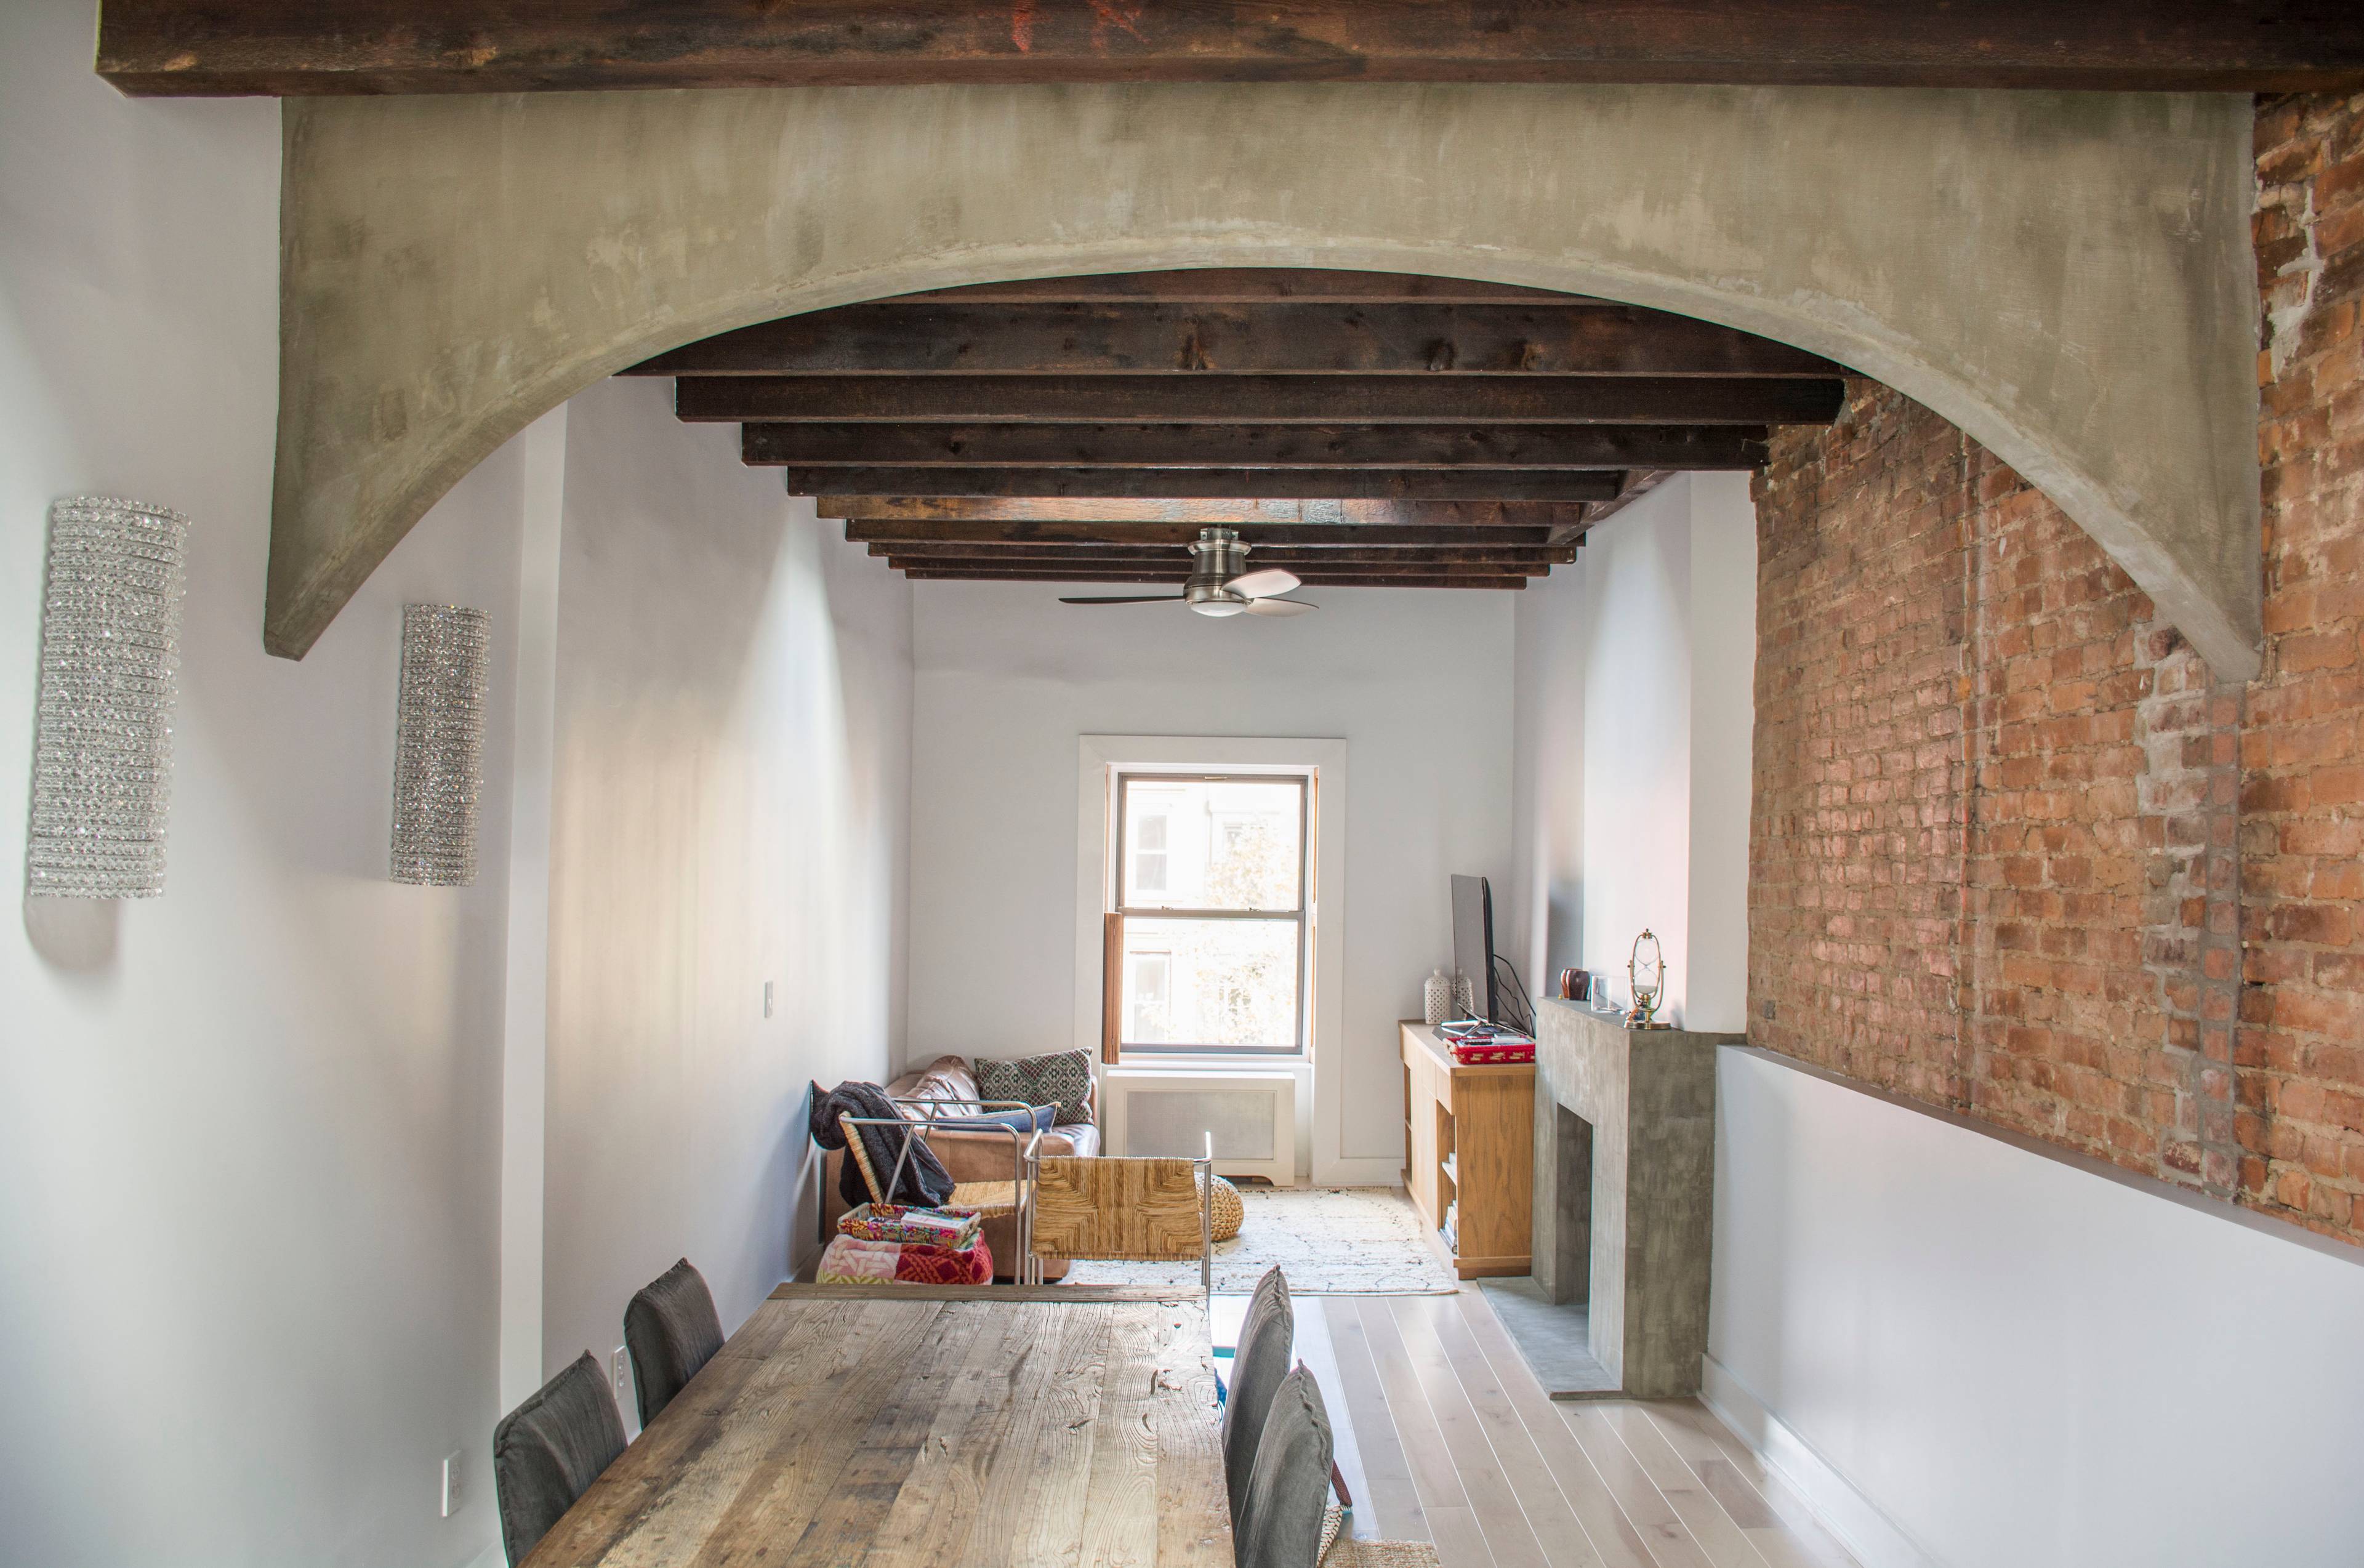 Prime Bed-Stuy Duplex 3 Bedroom with In-Unit Laundry and Sprawling Living Space